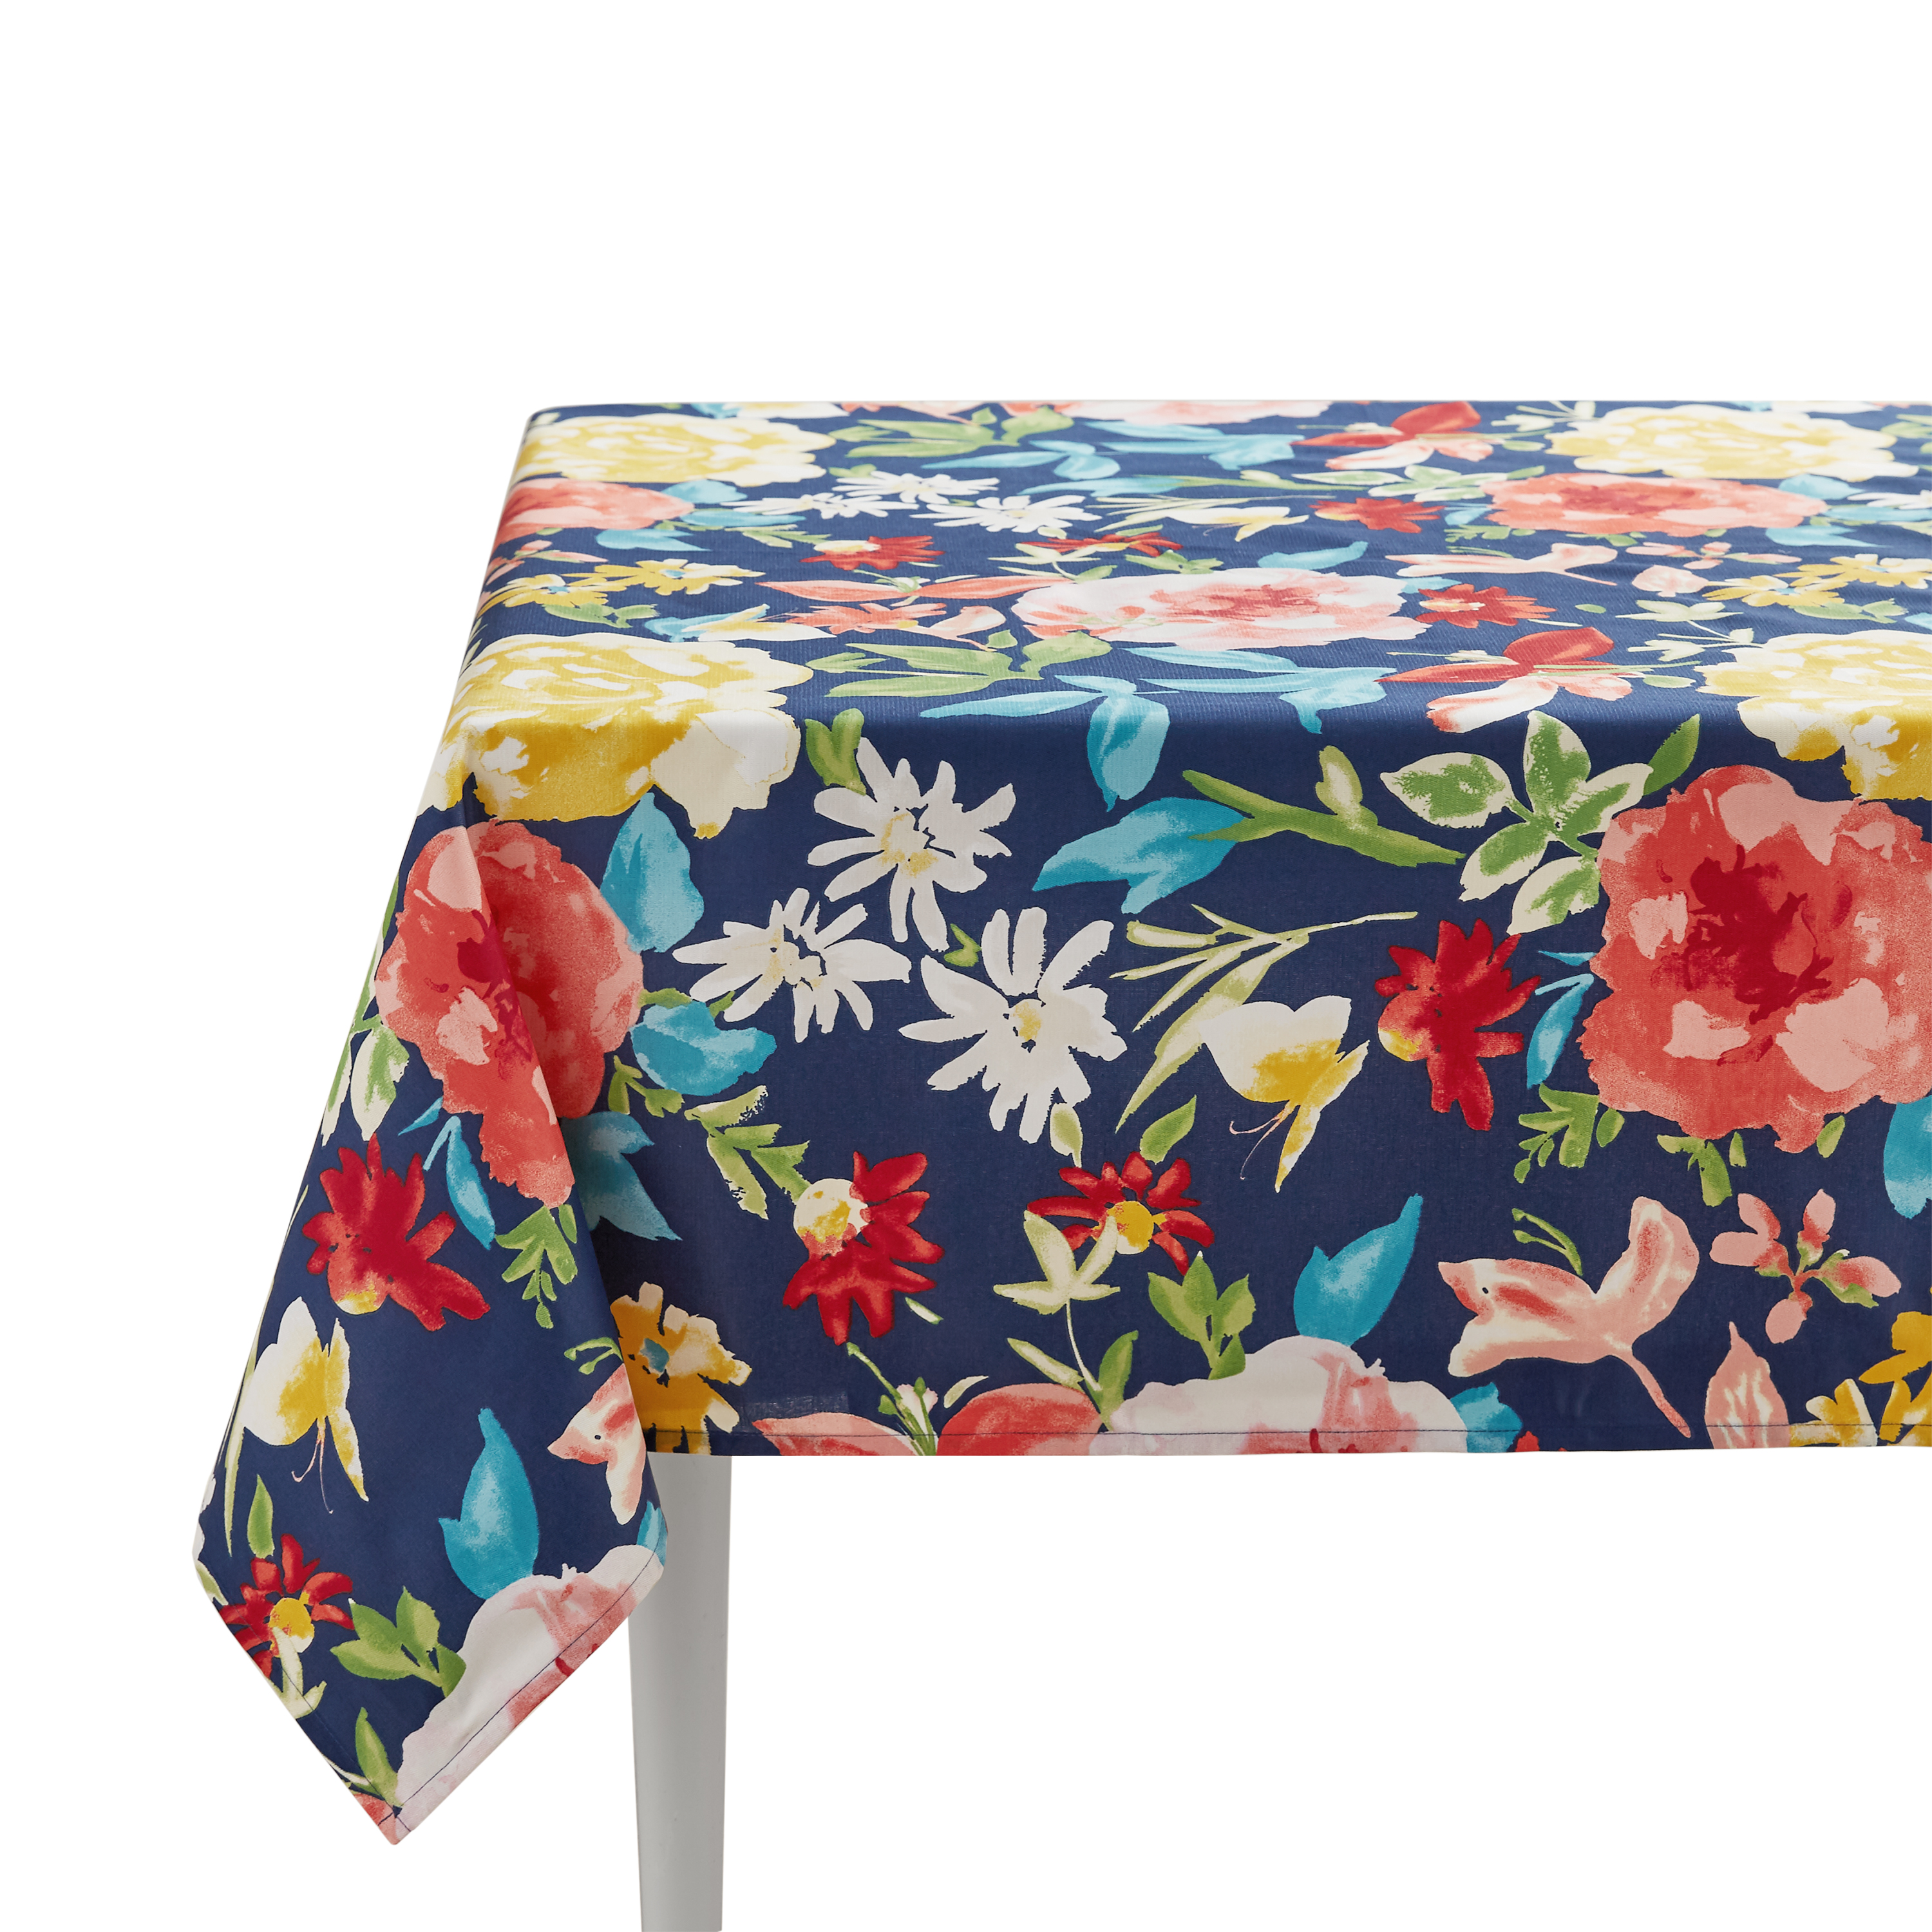 The Pioneer Woman Fiona Fabric Tablecloth, 60"W x 84"L, Multicolor, Available in Multiple Sizes - image 2 of 5